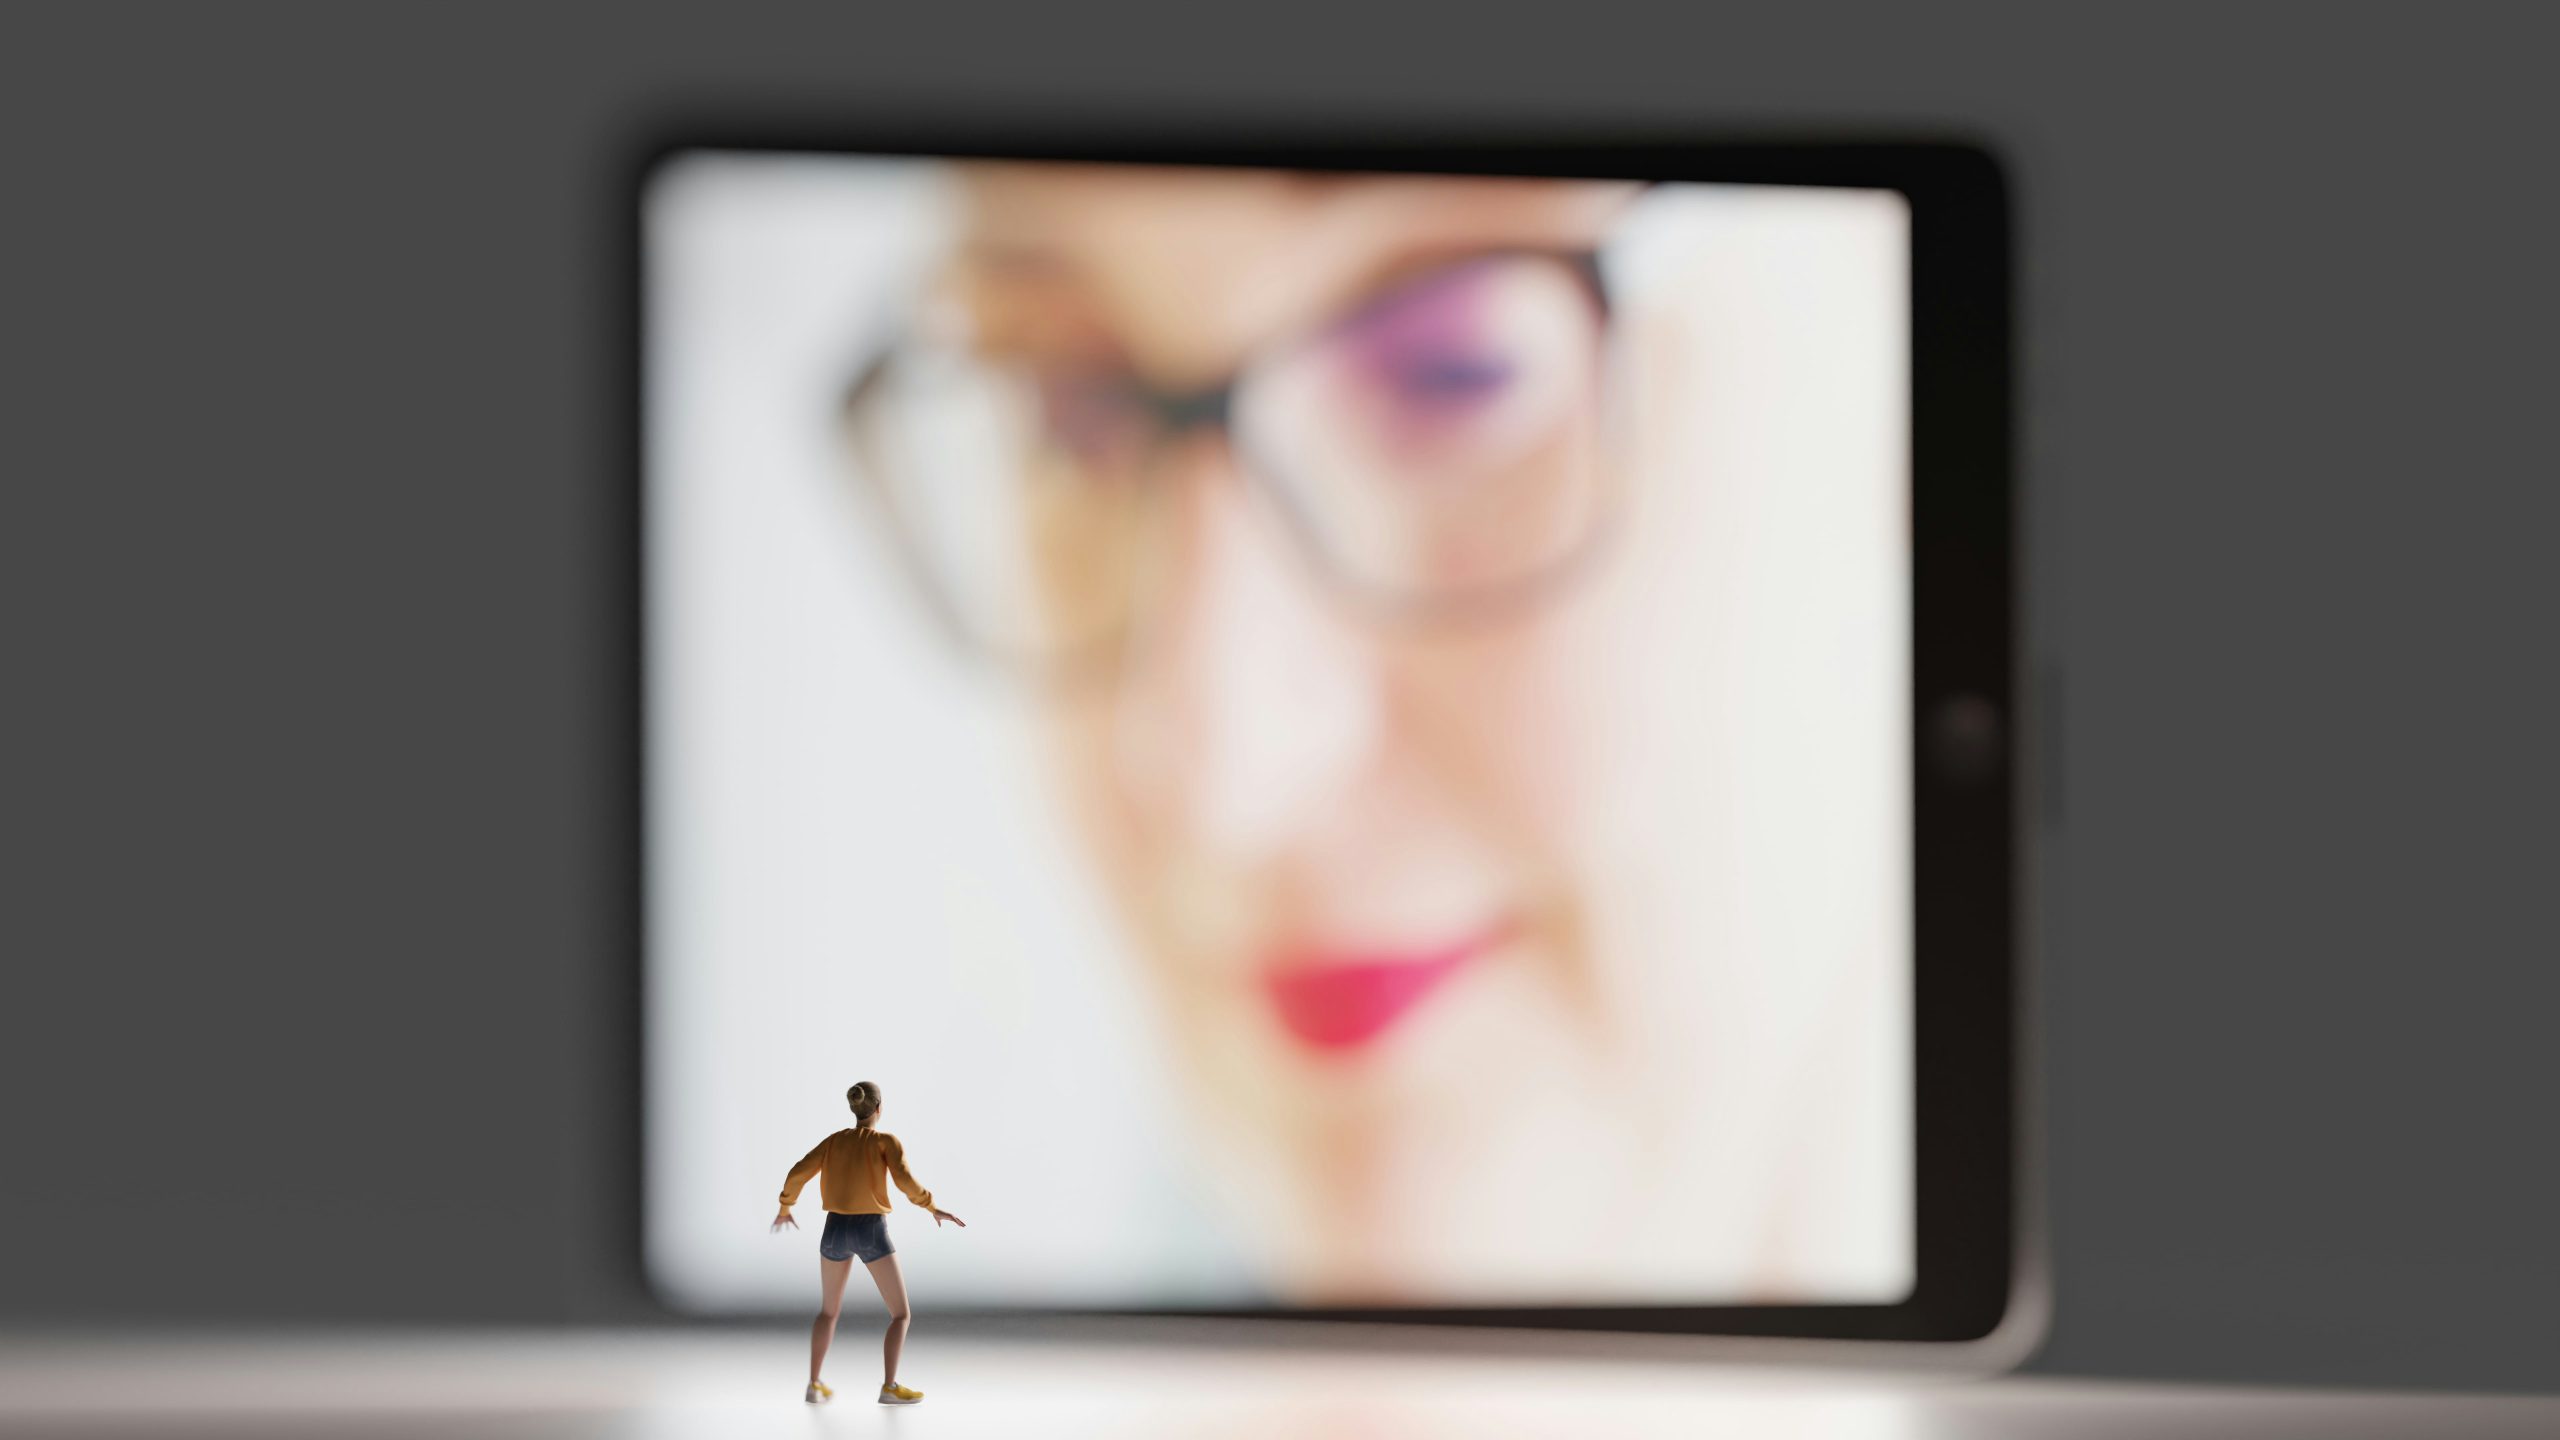 A tiny action figure looks up at a blurred female face that fills a computer monitor.